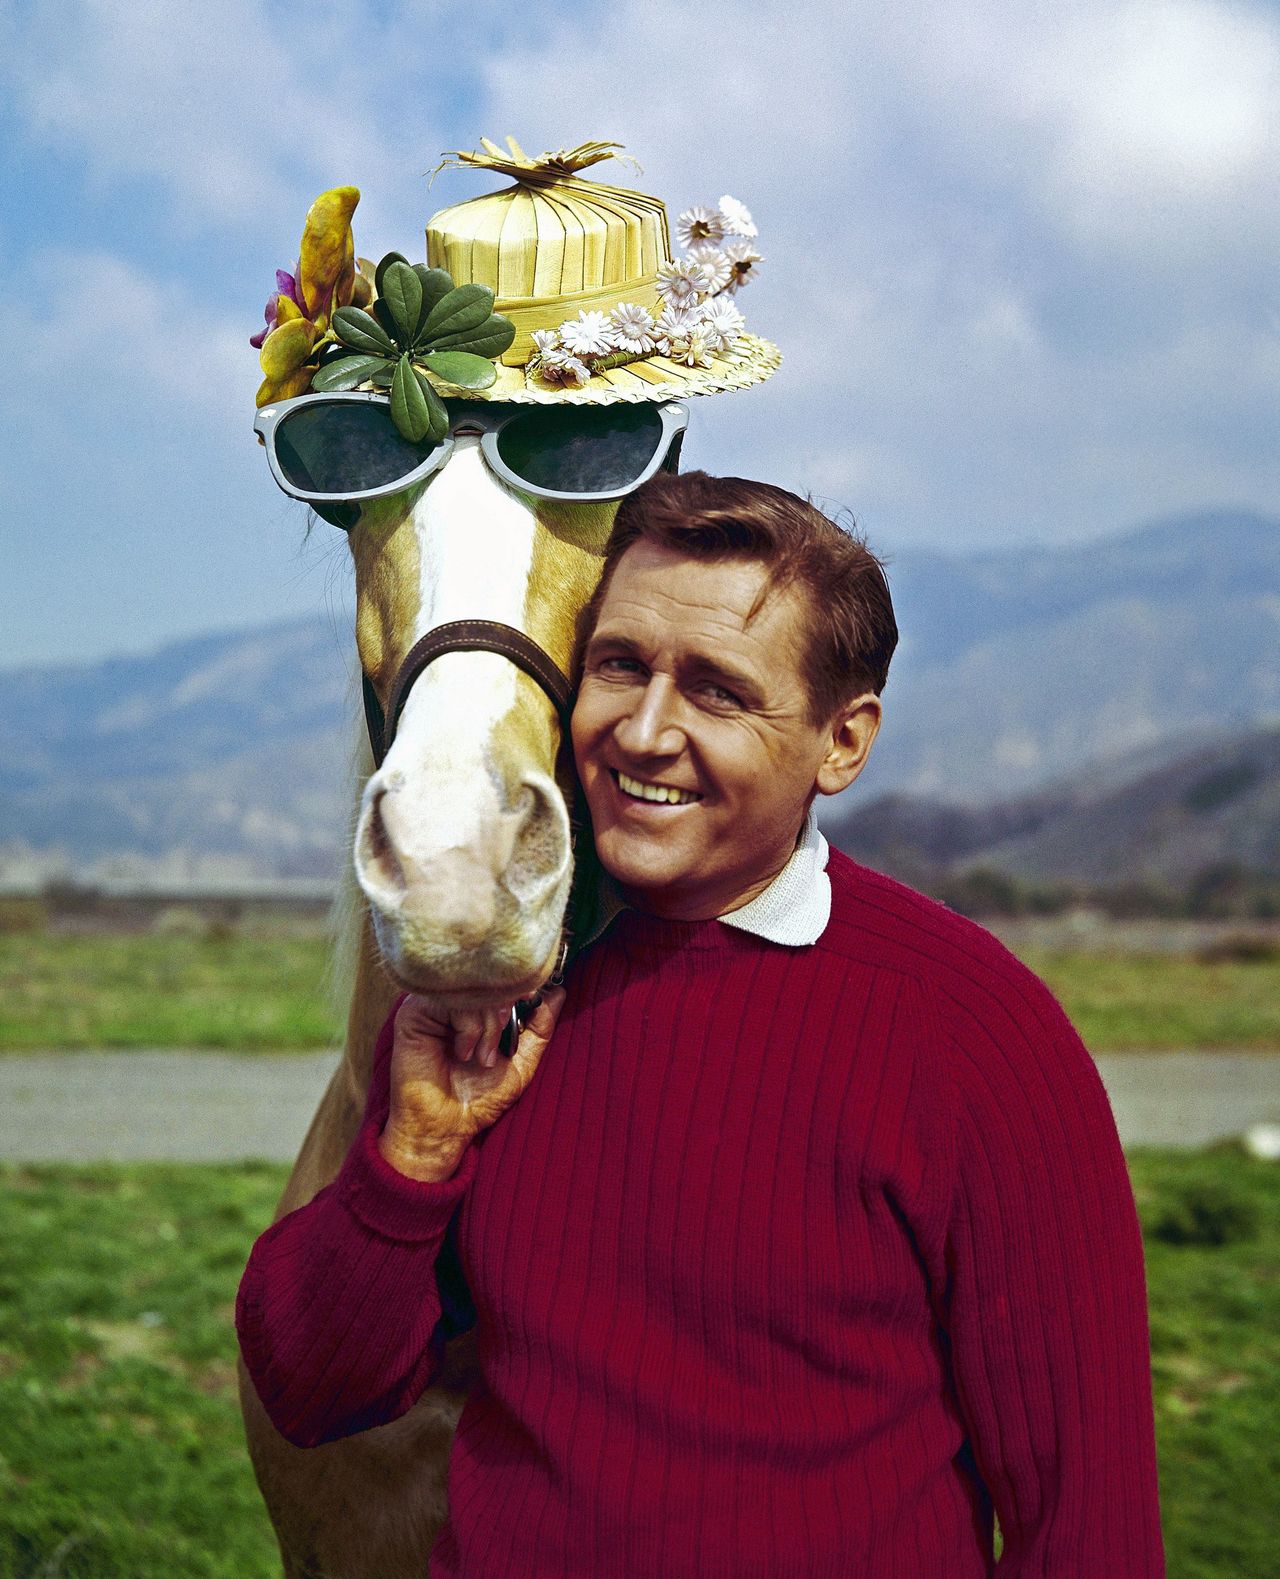 Mister Ed, equine star of the television series of the same name, poses with his TV co-star Alan Young on a beach in Malibu, California. Young, who played straight man to the talking horse in the 1960s sitcom, has died.